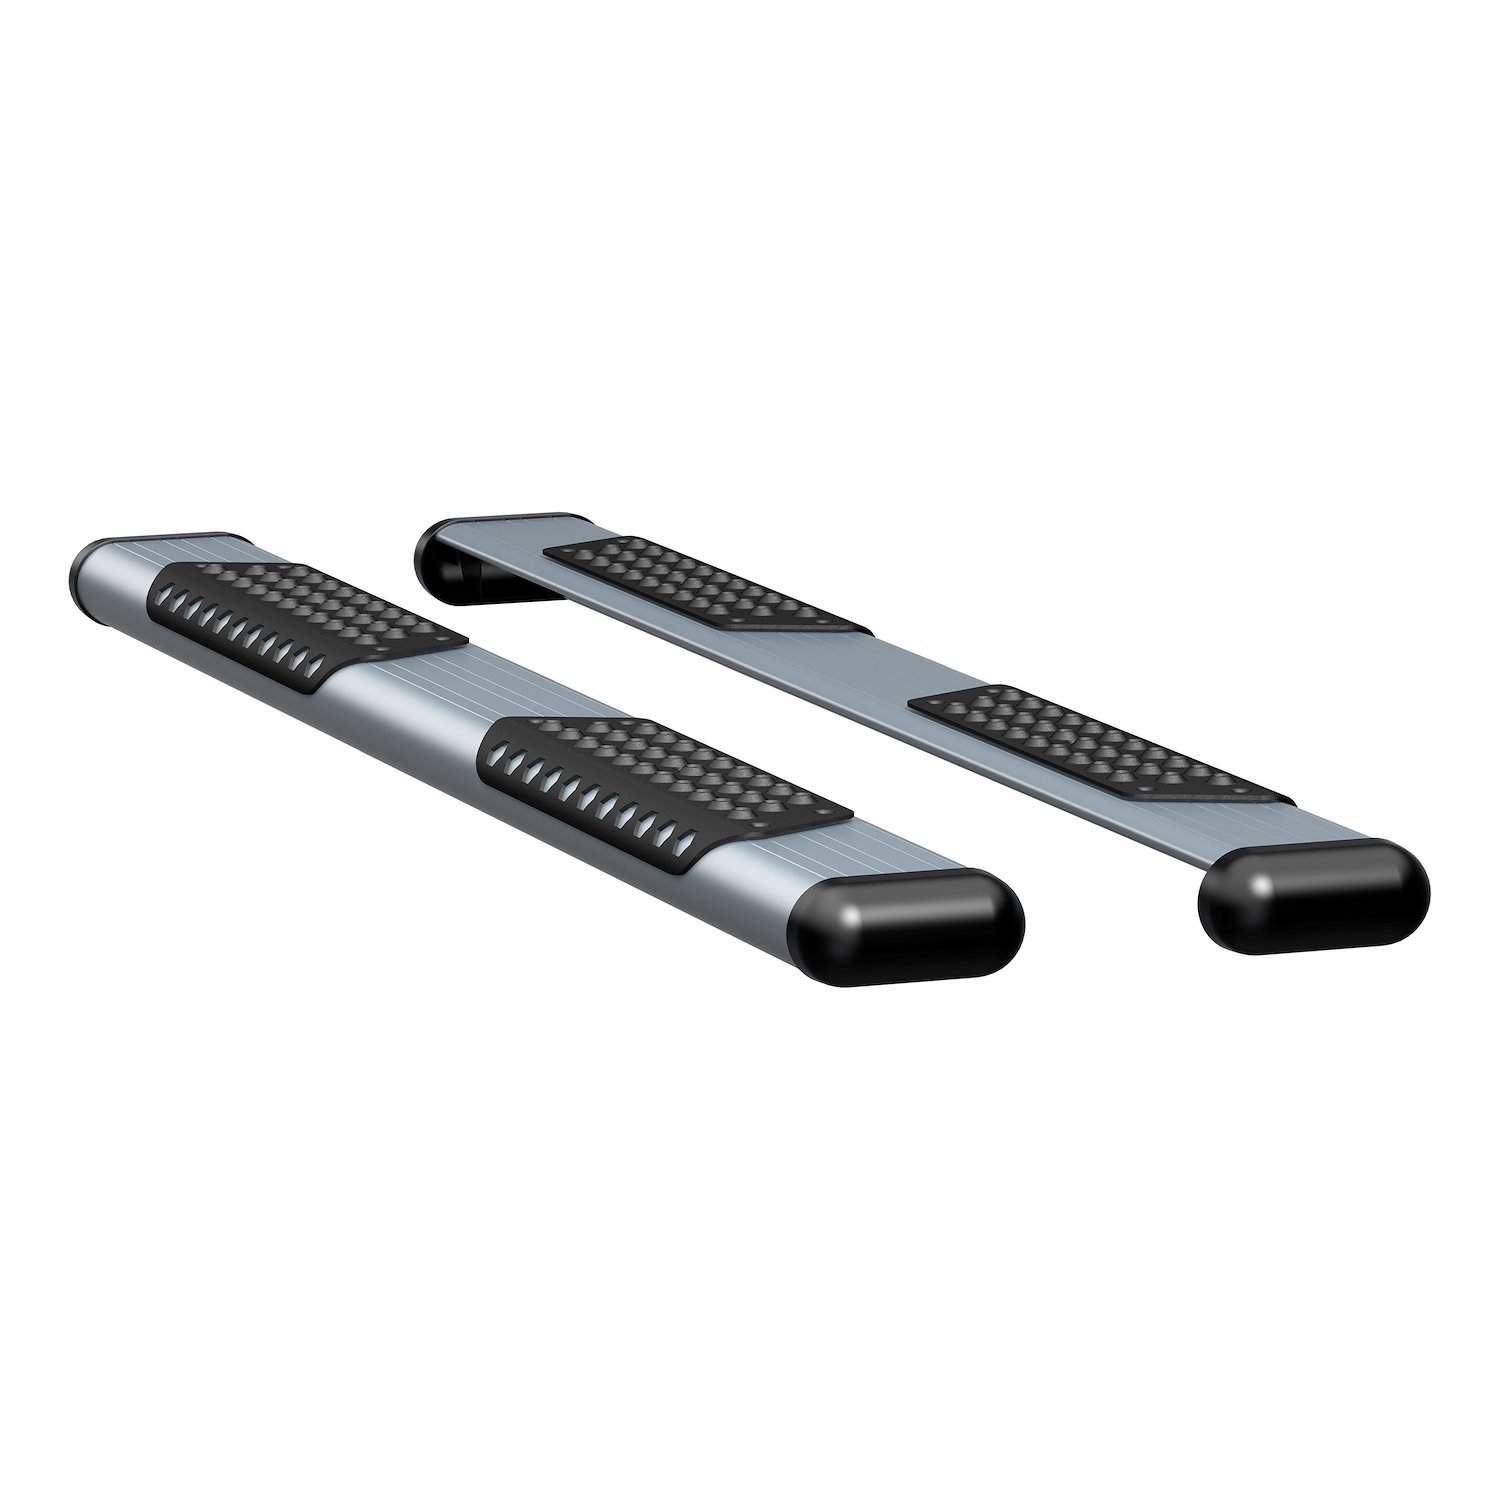 583060-571521 O-Mega II 6 in. x 60 in. Silver Aluminum Side Steps Fits Select Ford F-Series